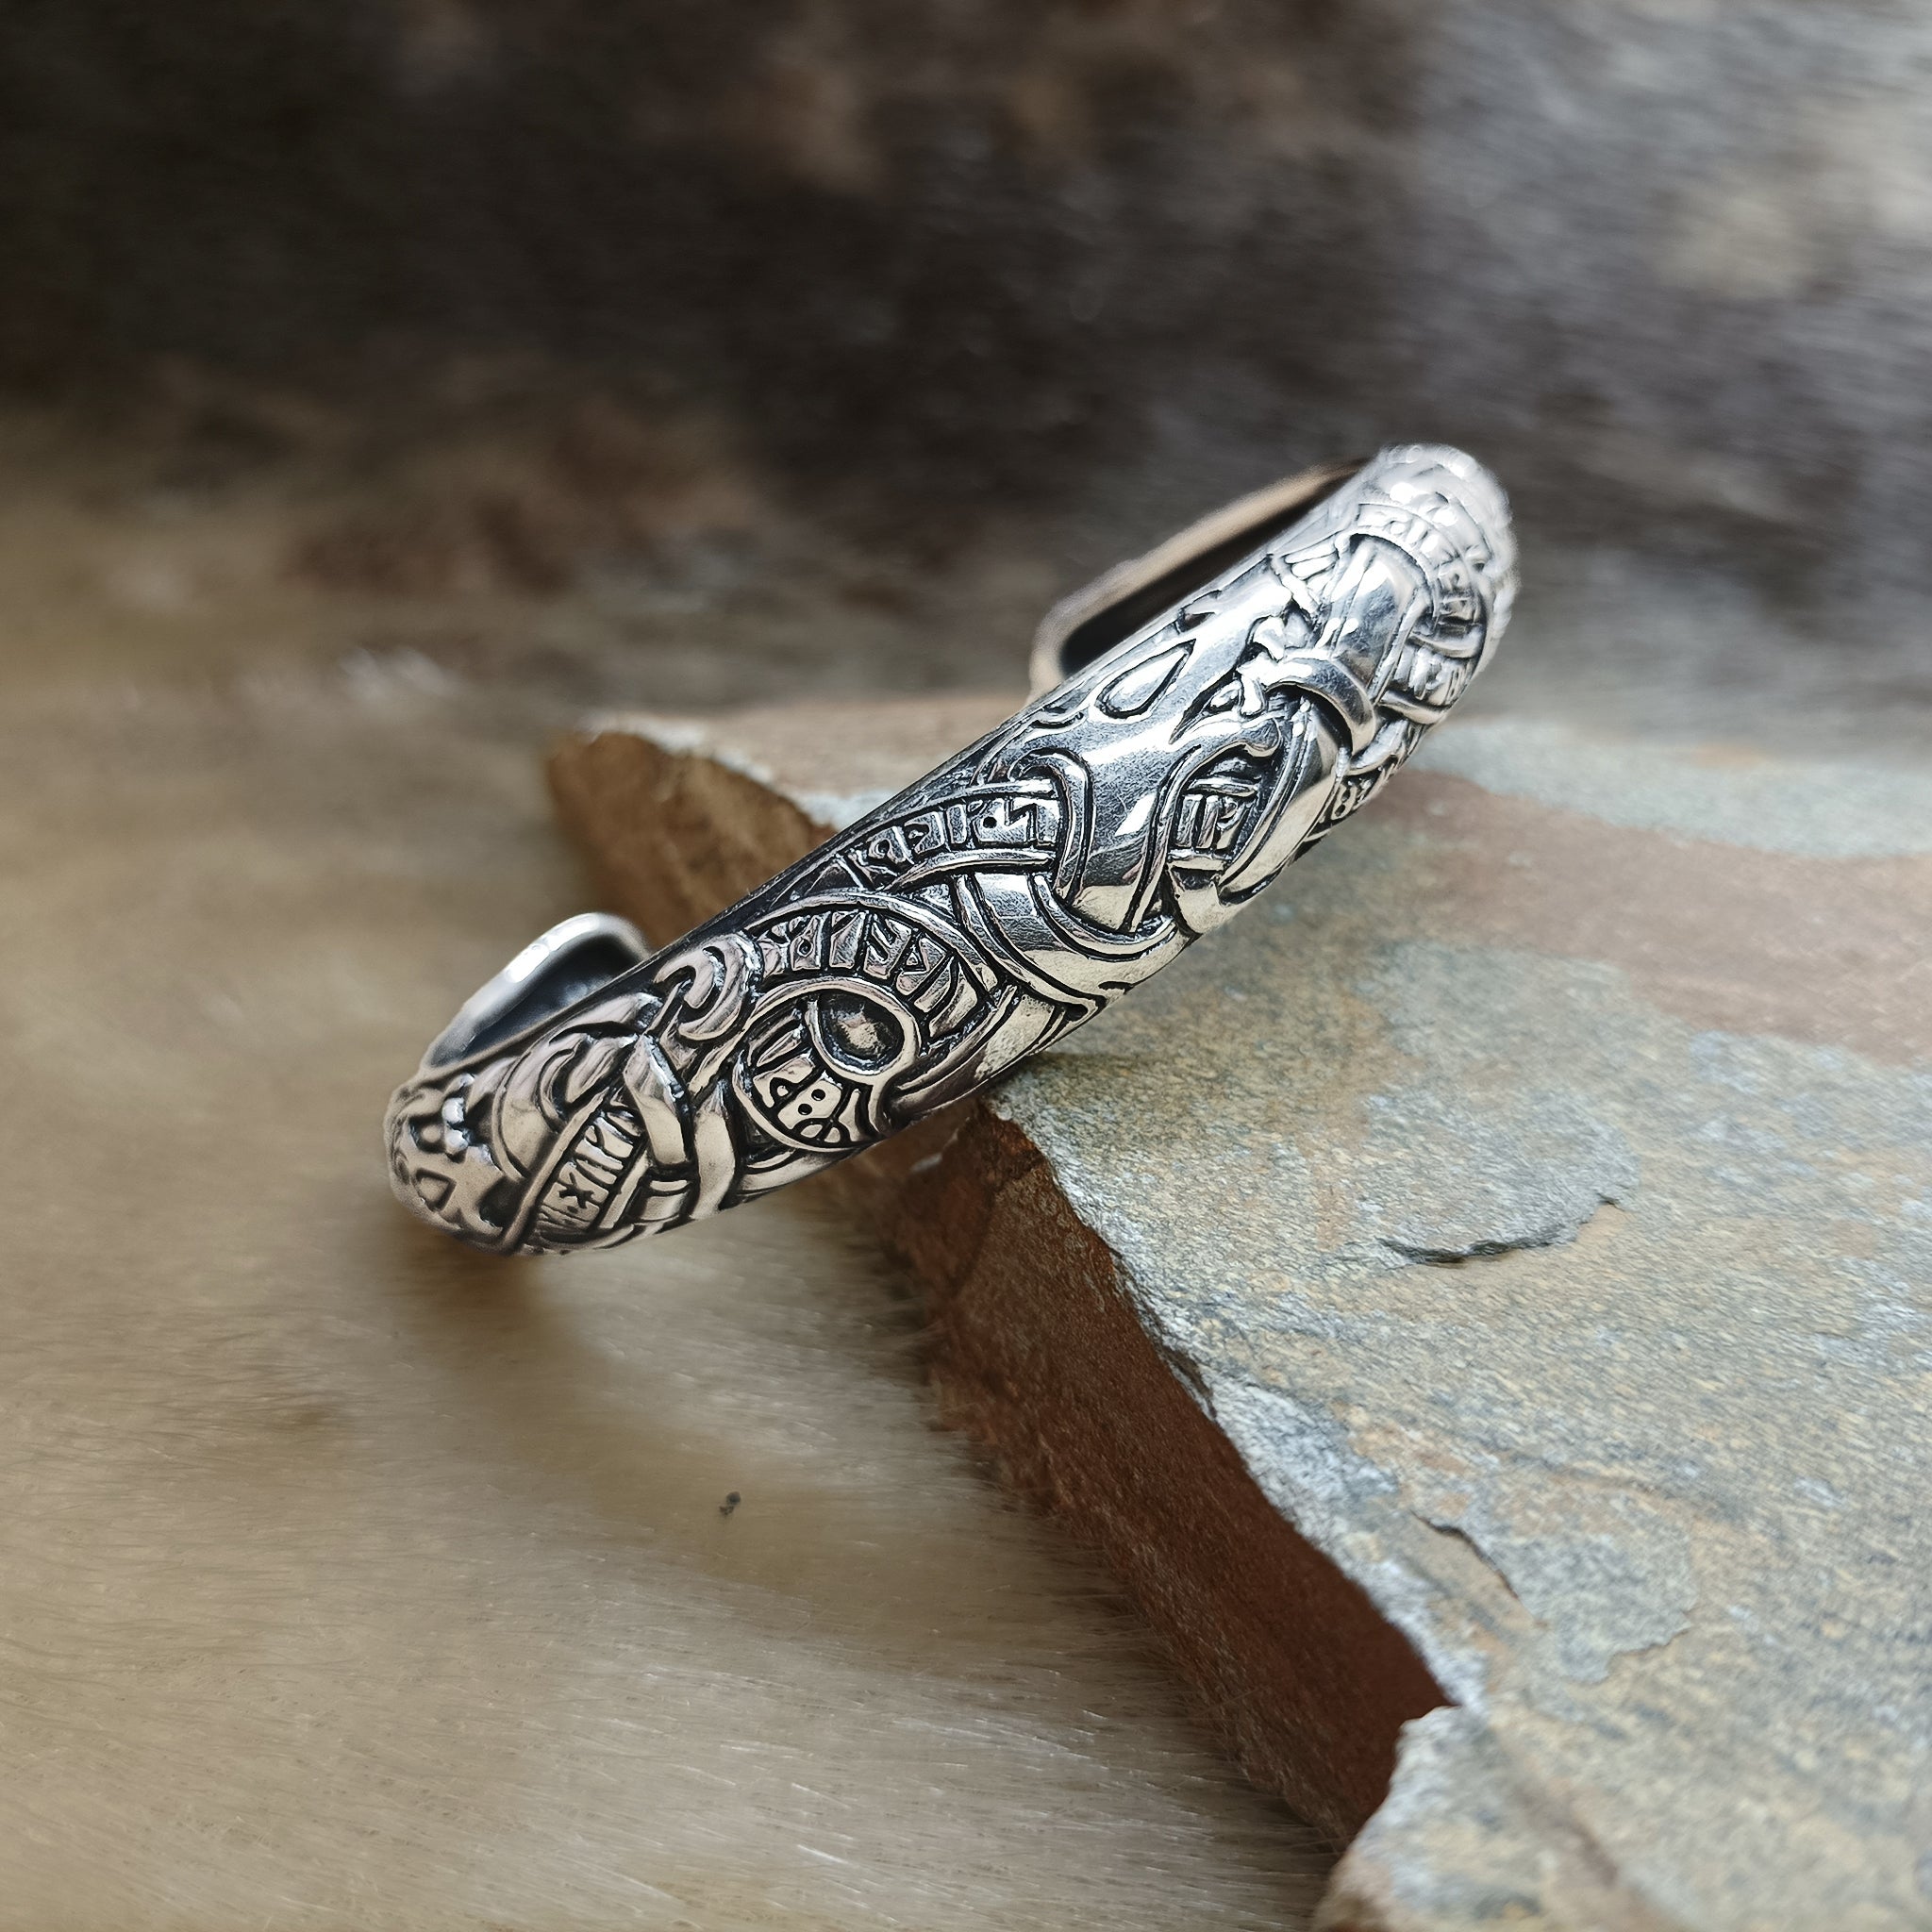 Silver Runic Viking Bracelet / Arm Ring on Rock - Front Angle View